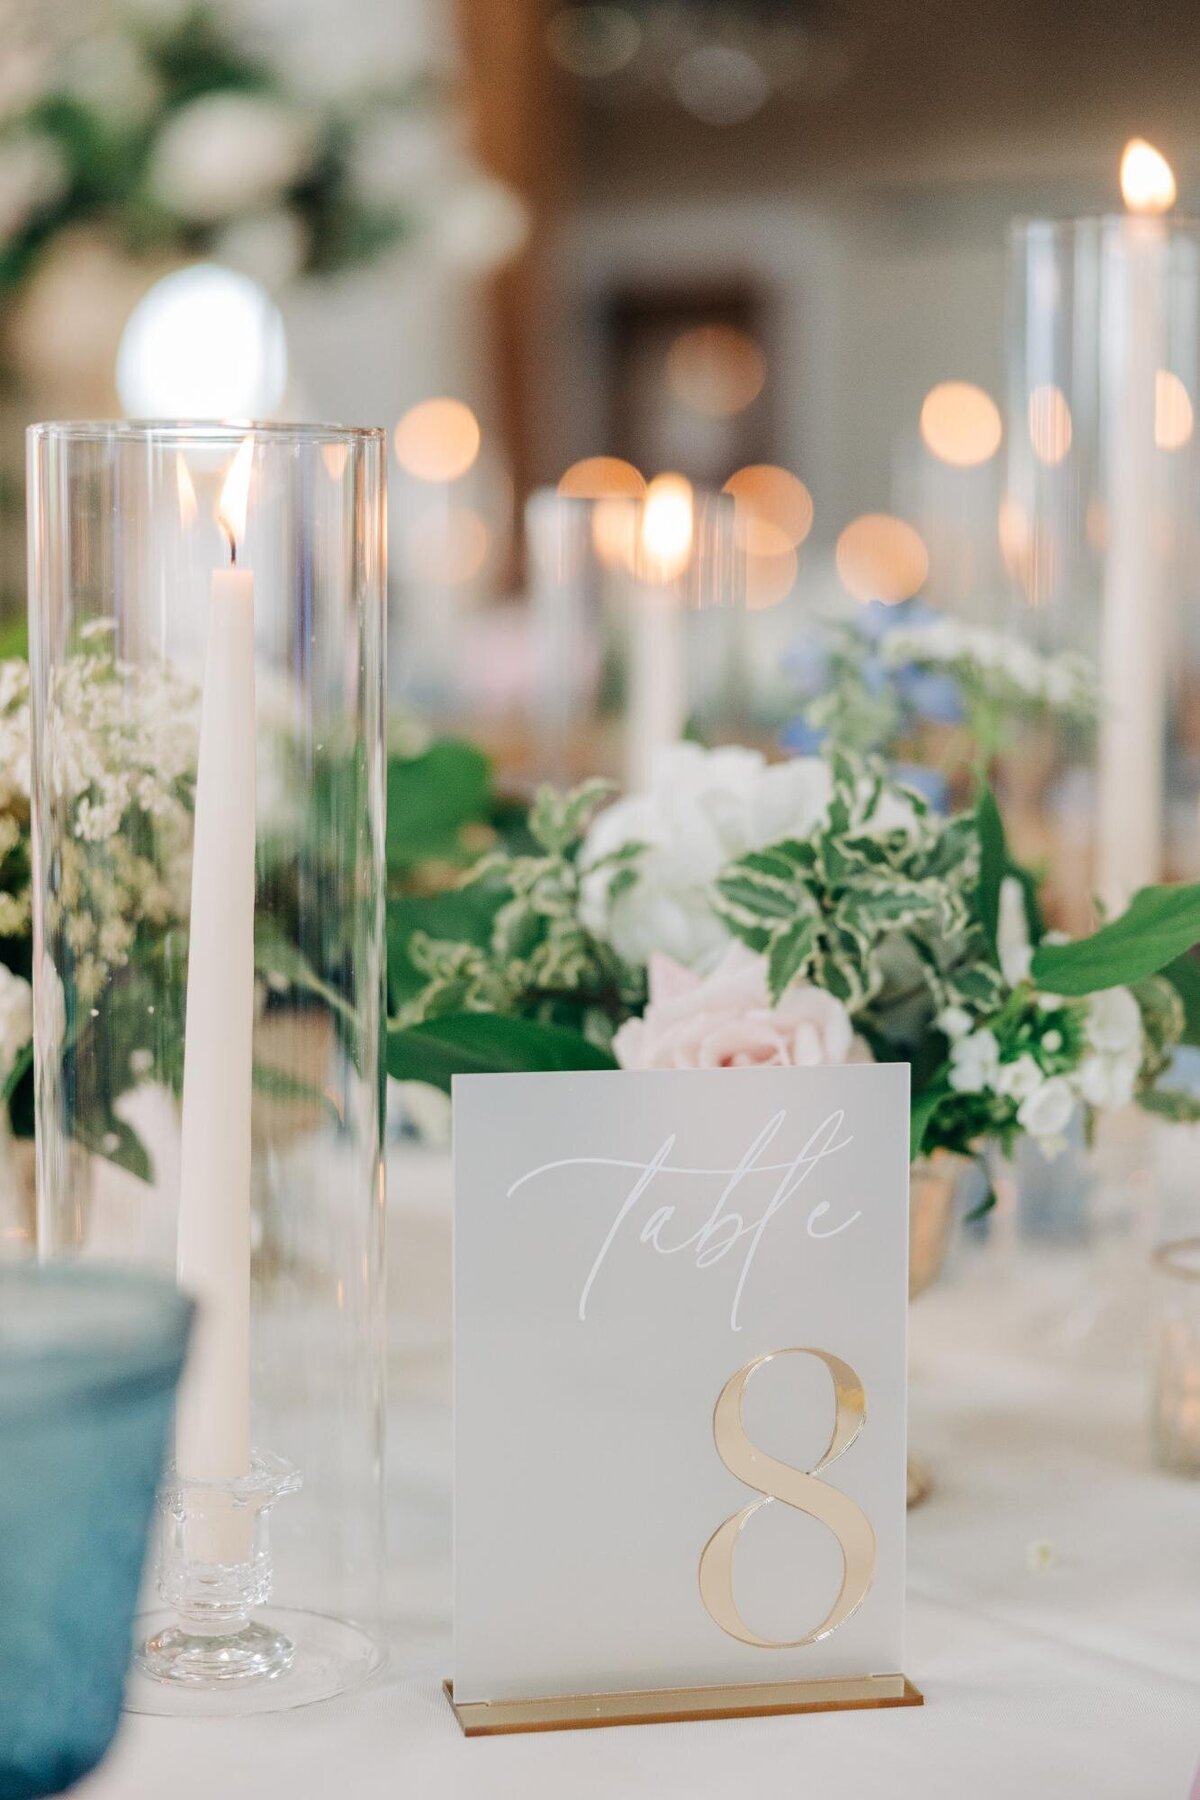 Elegant wedding table setting with a number 8 sign, candles, and floral arrangements.